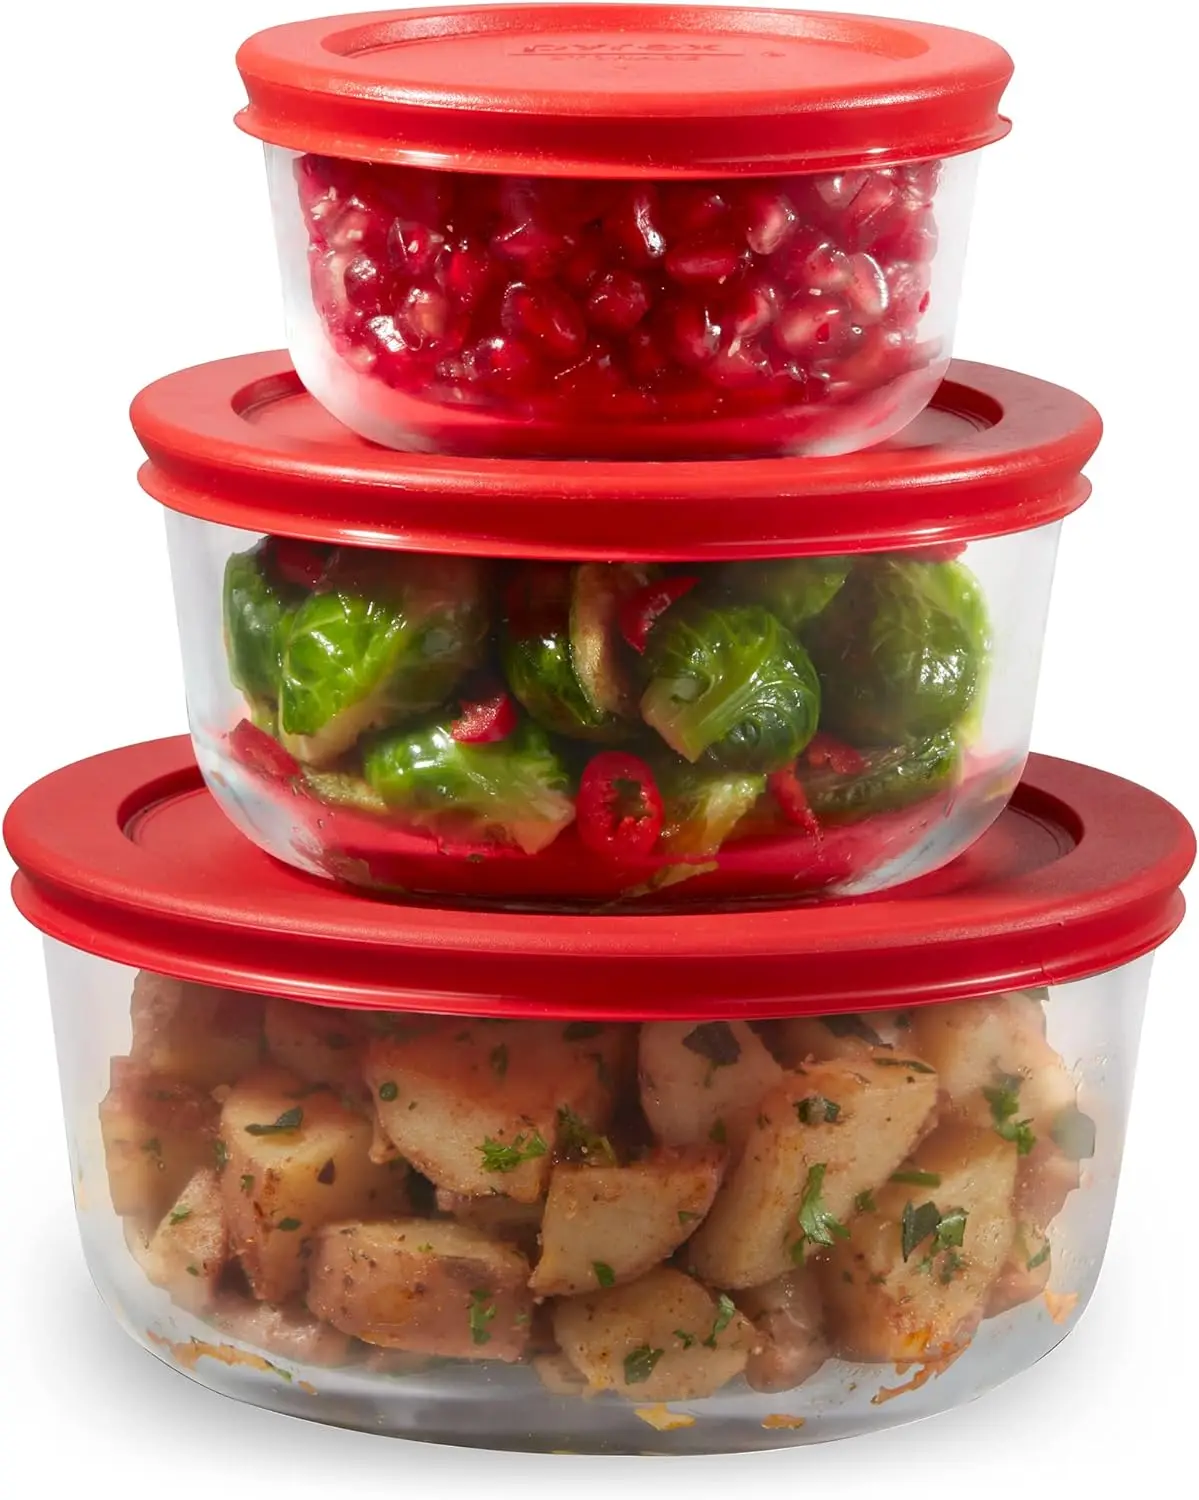 https://ae01.alicdn.com/kf/Sdae77c357e52448d8ebe56db3f6fcfe2L/Pyrex-Simply-Store-4-PC-Large-Glass-Food-Storage-Containers-Set-Snug-Fit-Non-Toxic-Plastic.jpg